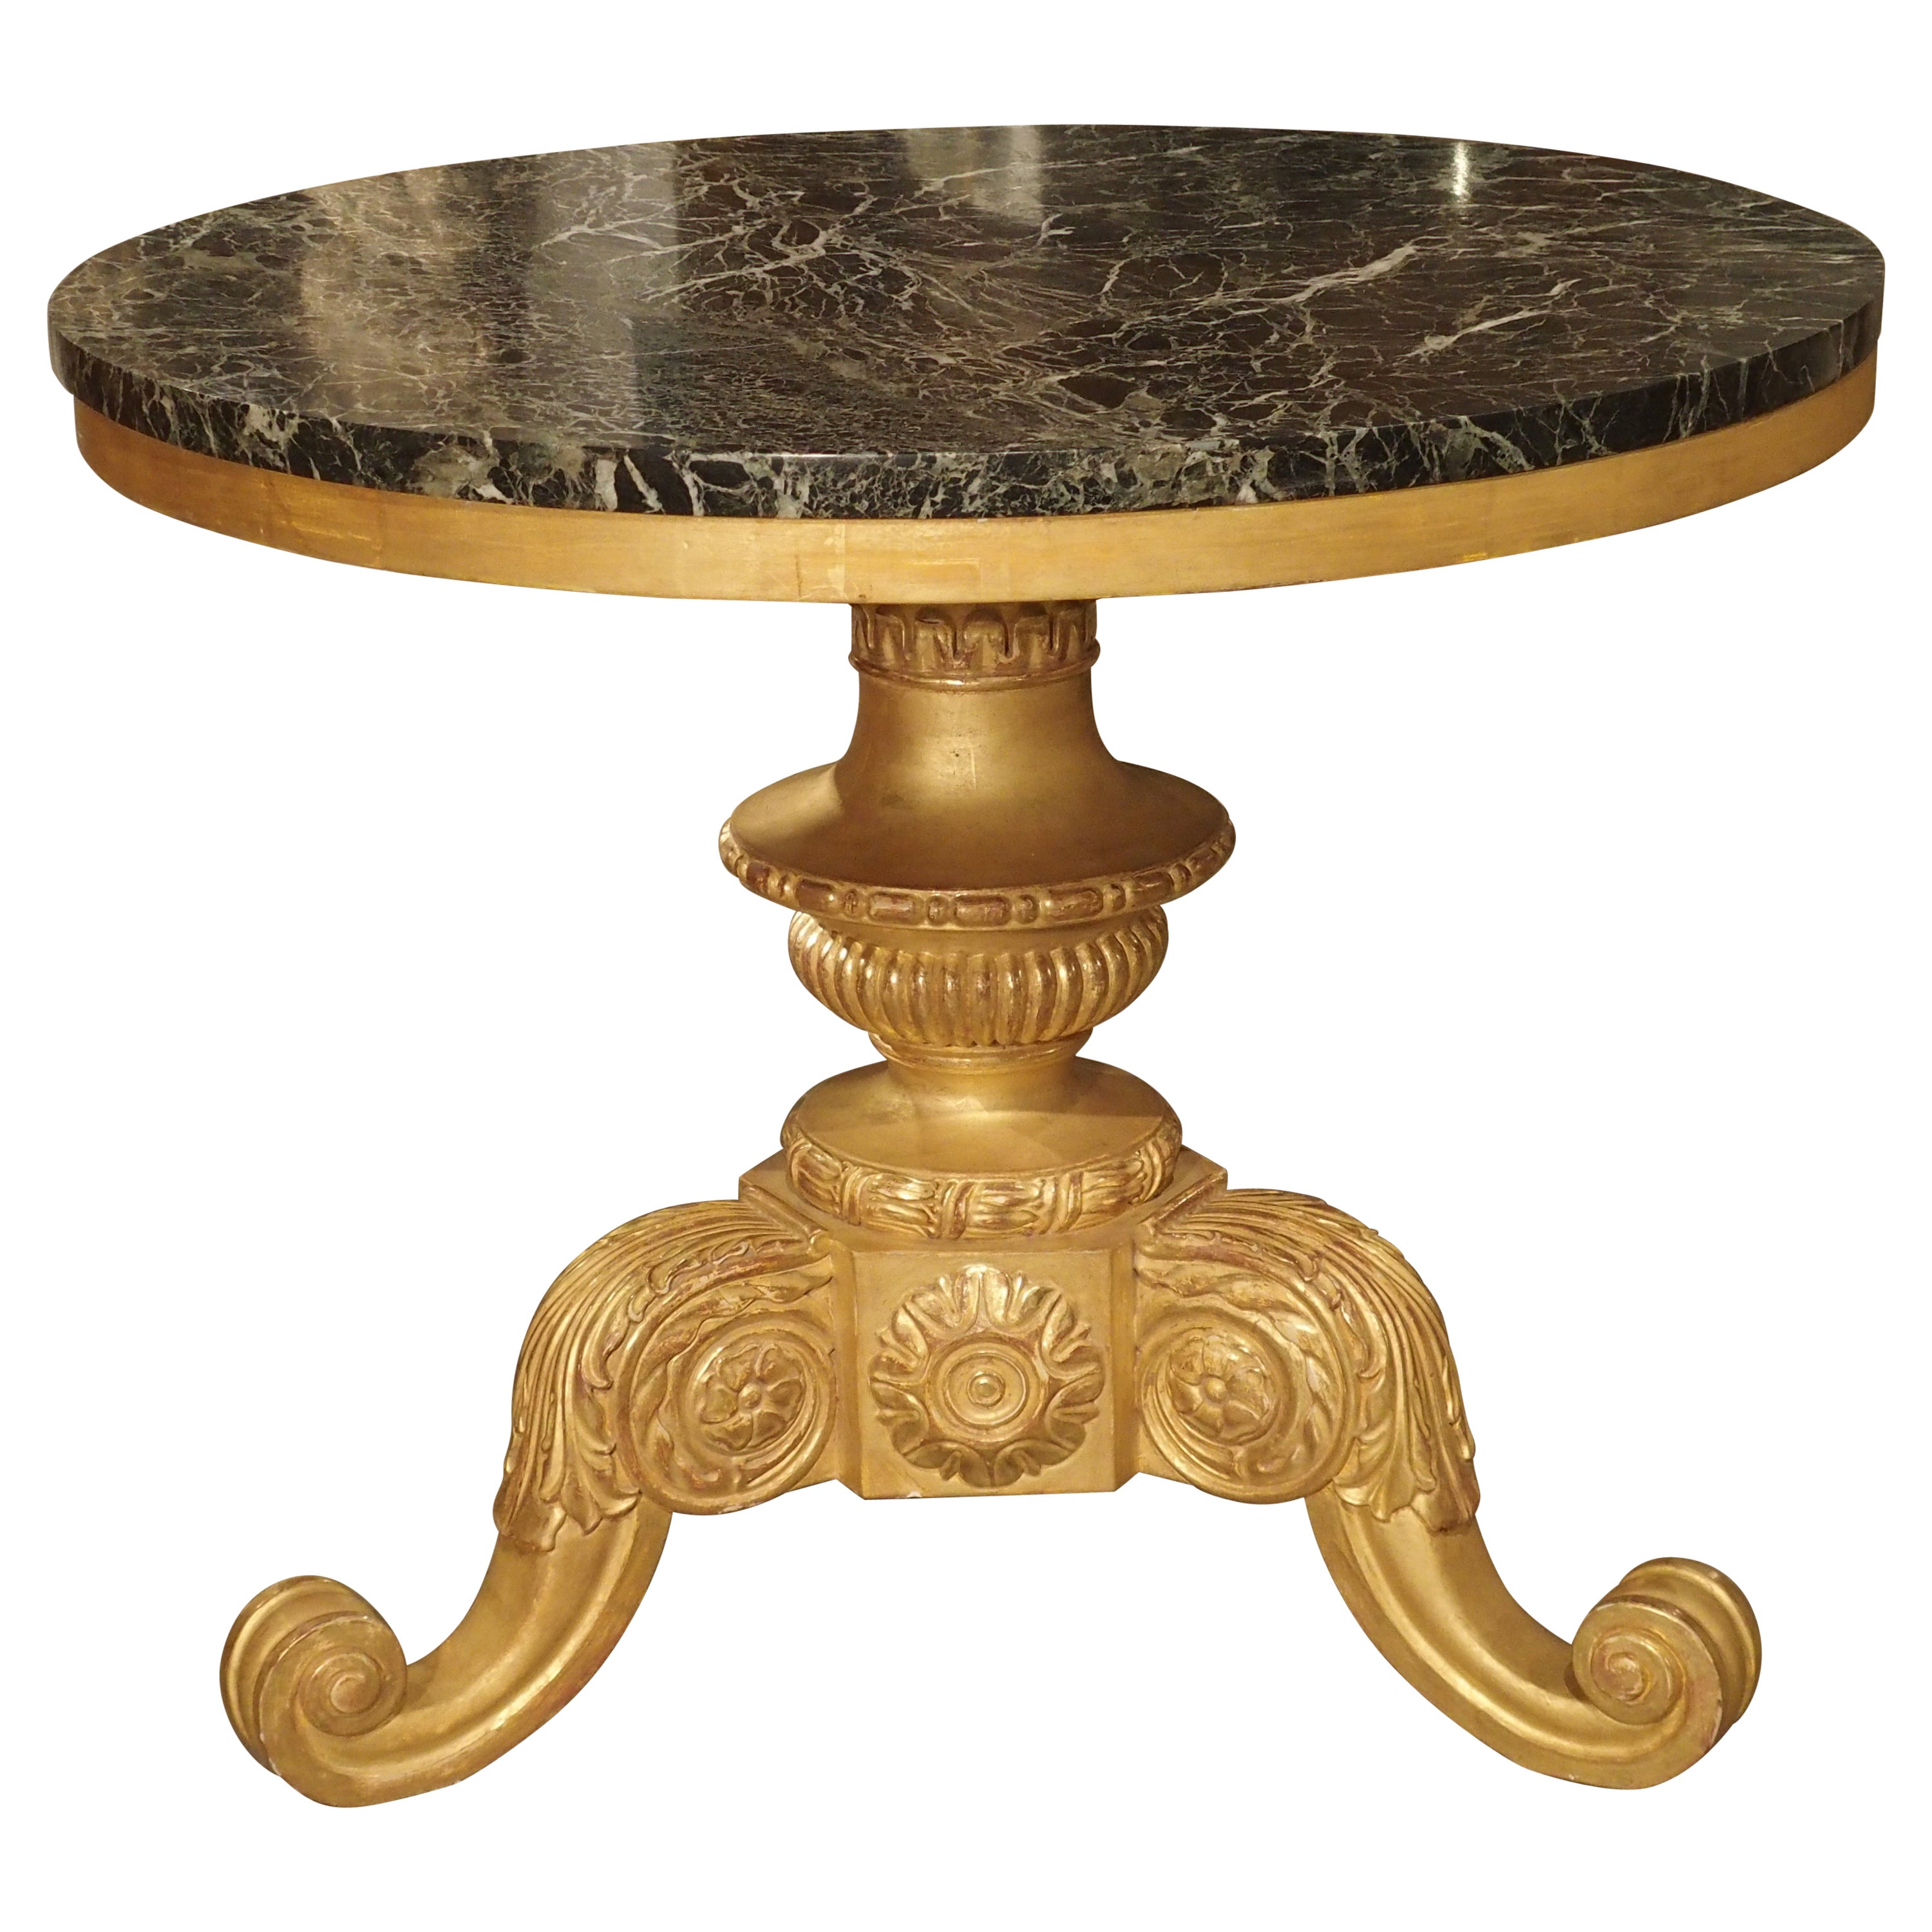 Circular Tripartite French Giltwood and Marble Center Table, Early 1900s